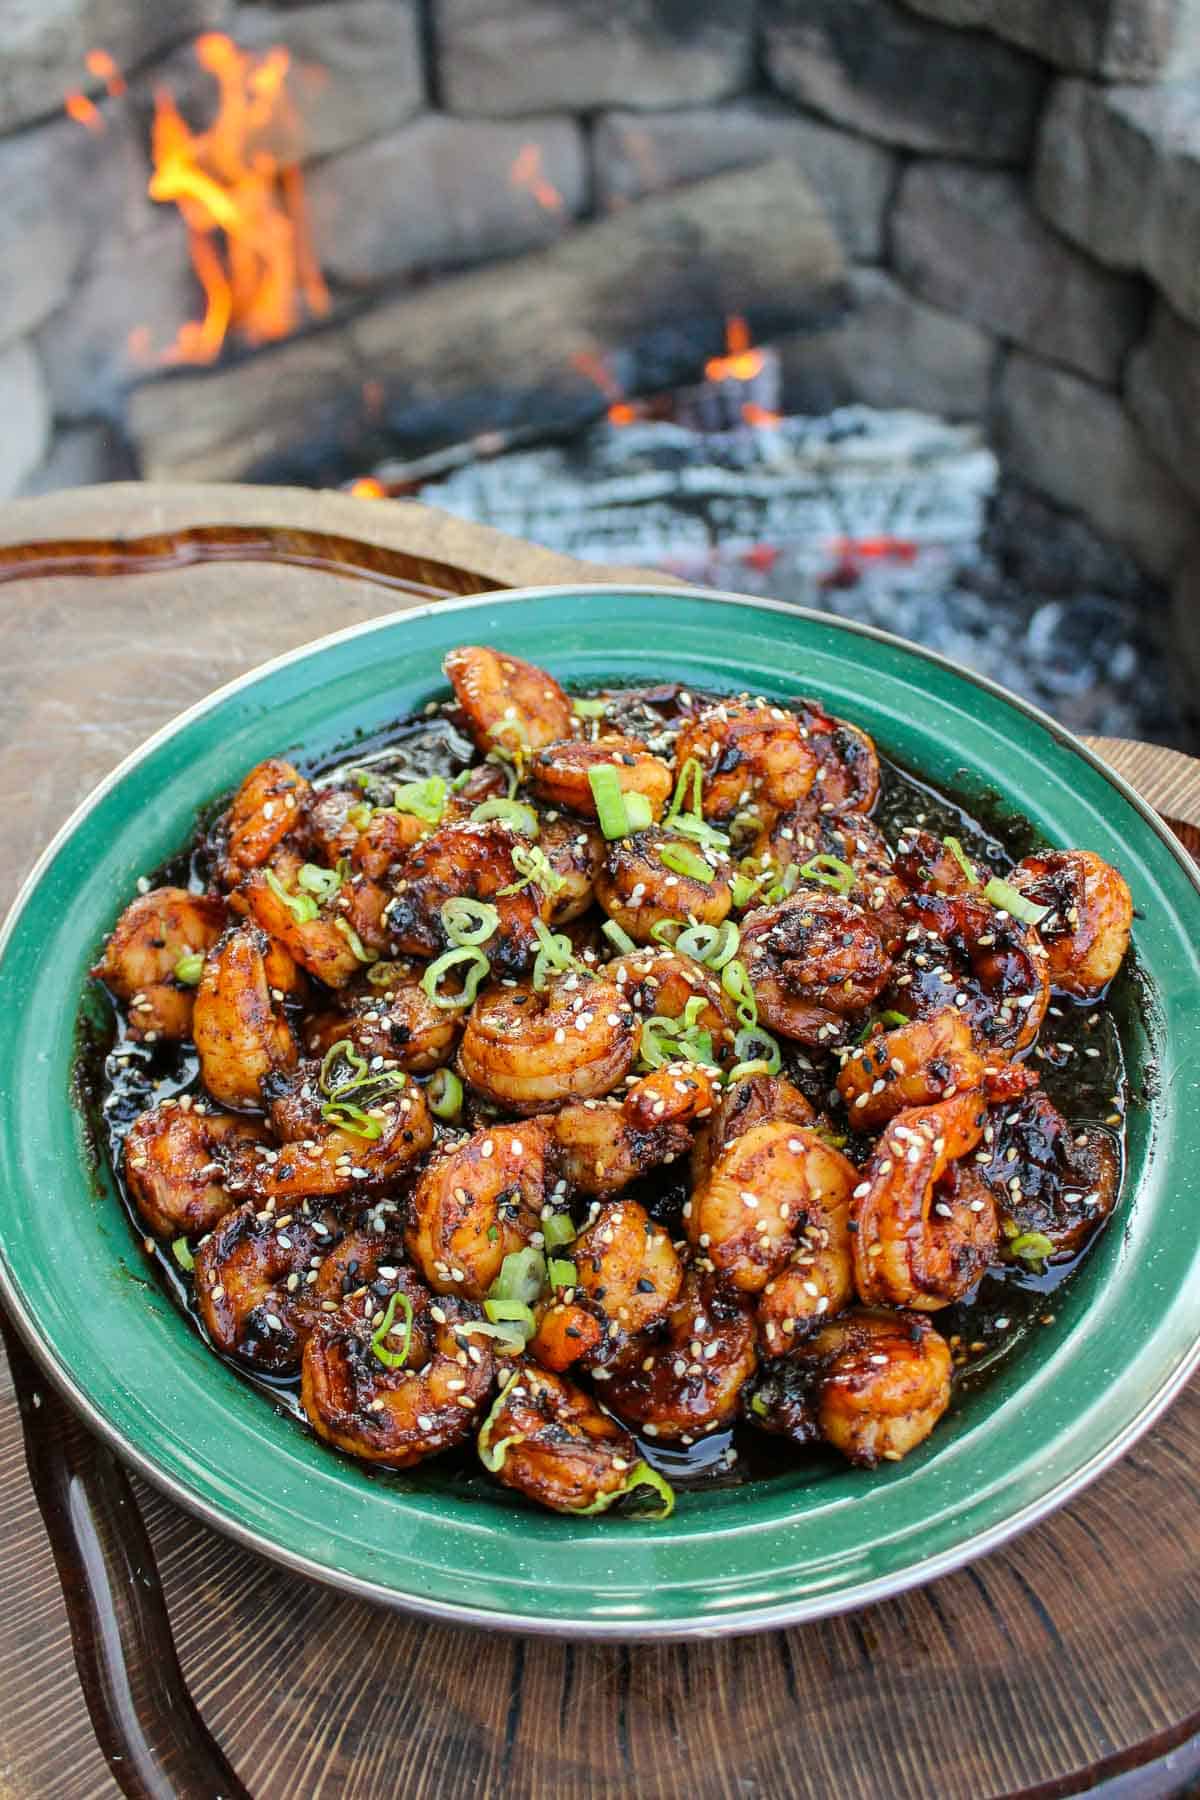 Hot Honey Garlic Shrimp garnished and plated so that we can serve it.